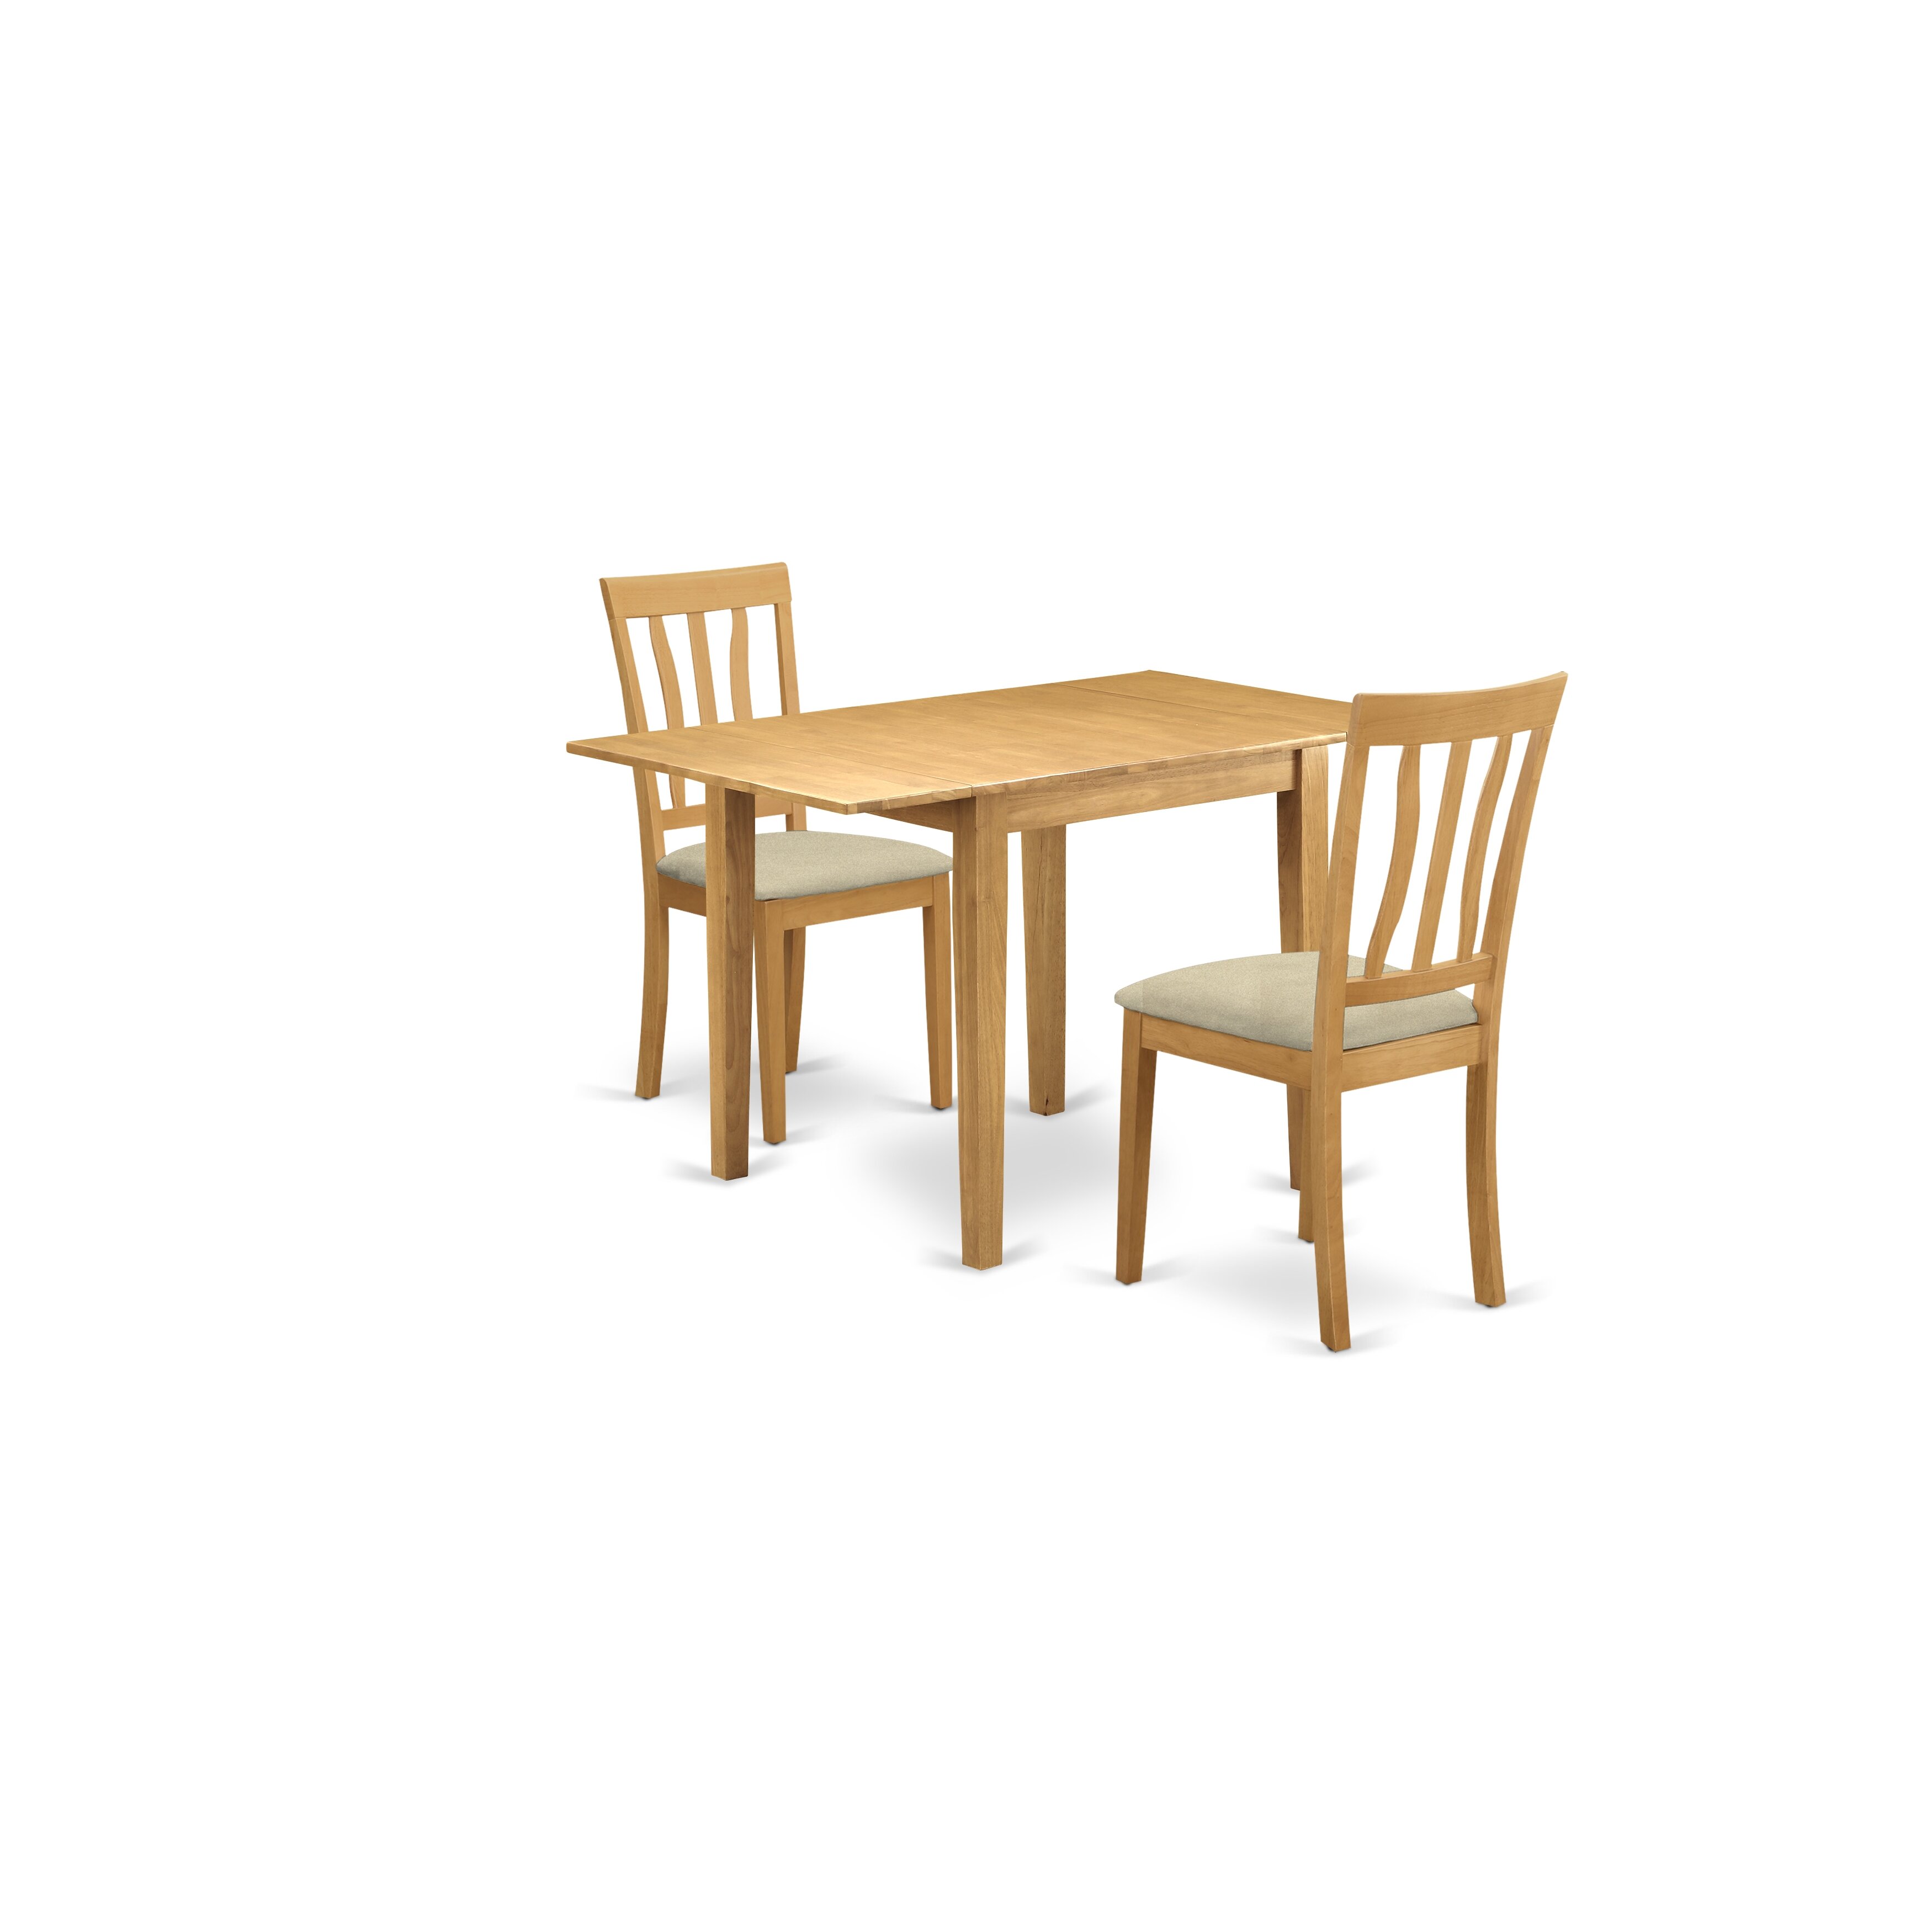 dining room table set 5 piece  four excellent wooden chairs  a fantastic  modern dining table  oak colour microfiber  oak finish wooden structure